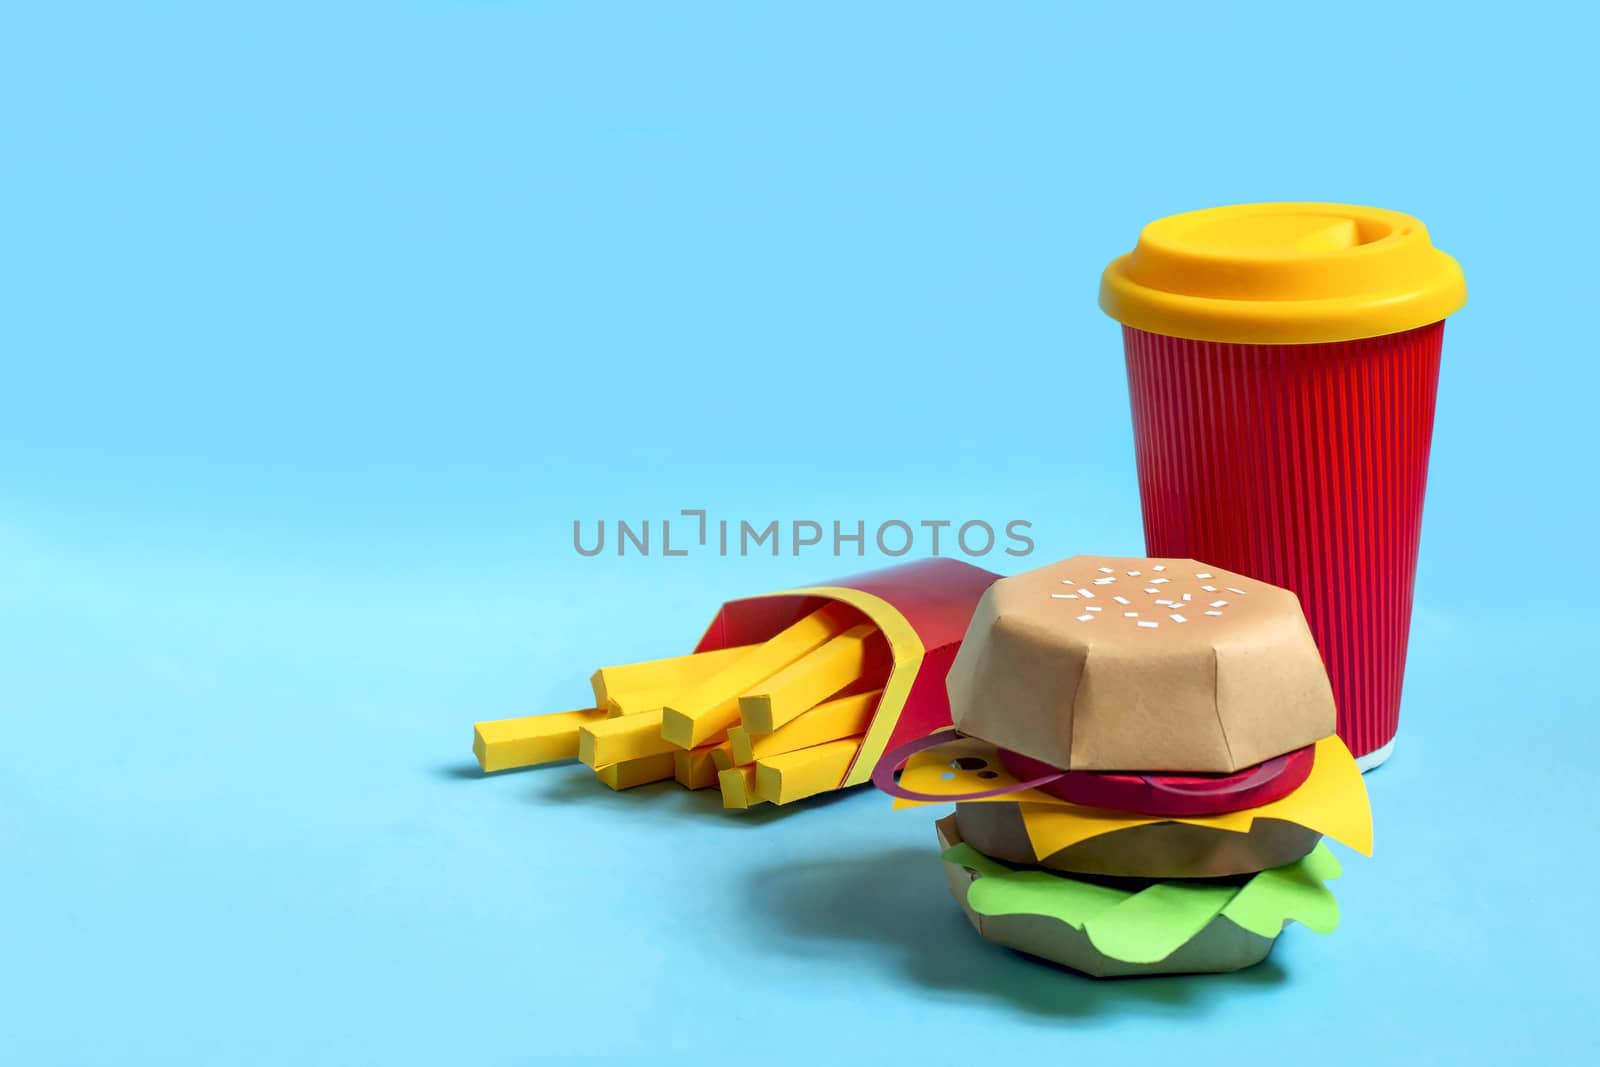 Handmade paper hamburger, french fries in box and drink in paper cup. Paper art and craft. Real volumetric handmade paper objects